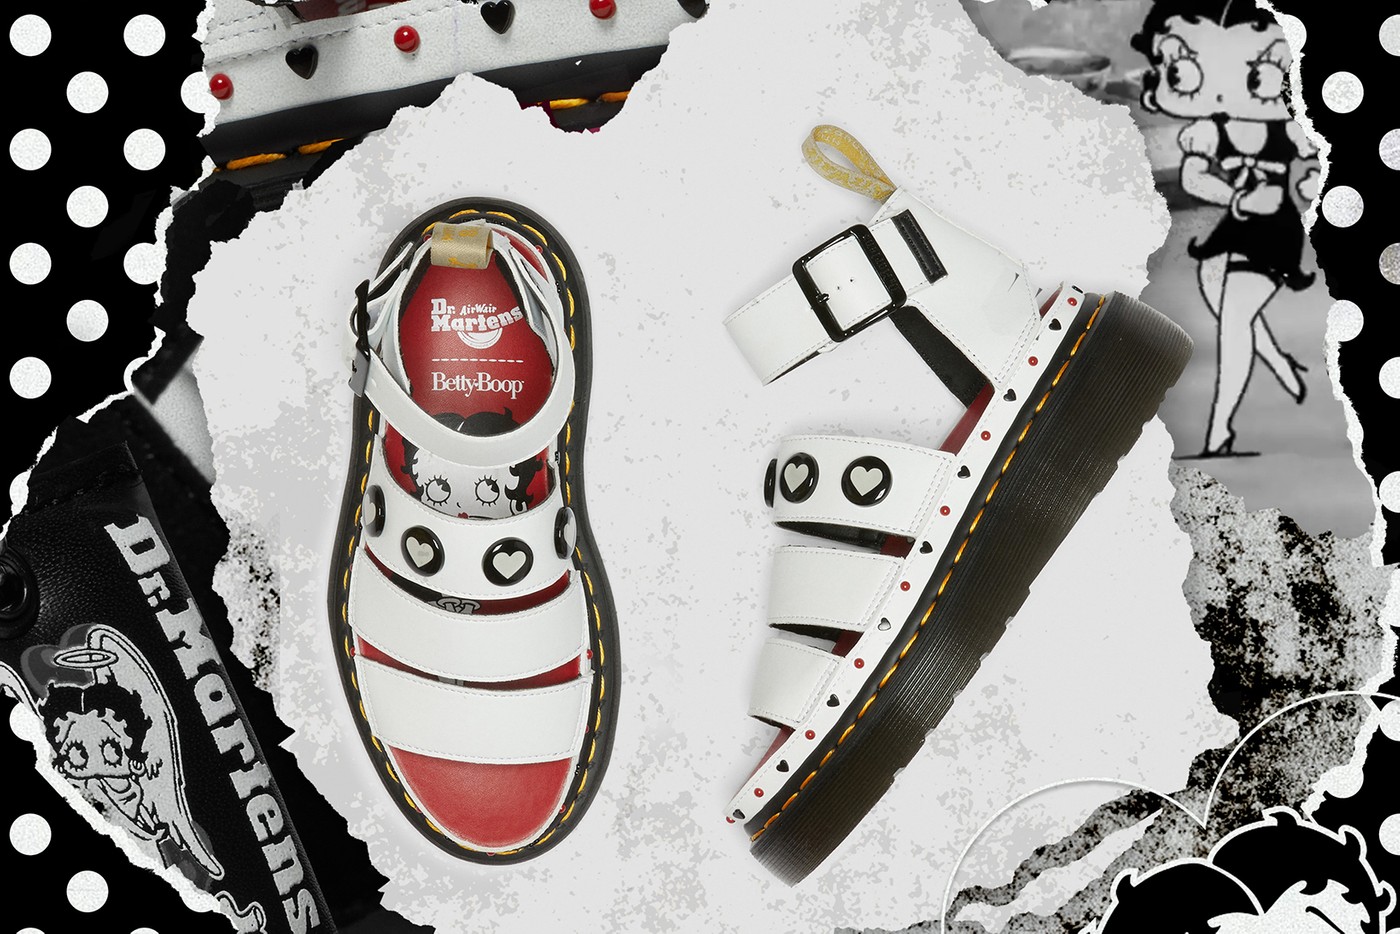 Dr. Martens spotlights the mischievous and rebellious spirit of Betty Boop in new collab